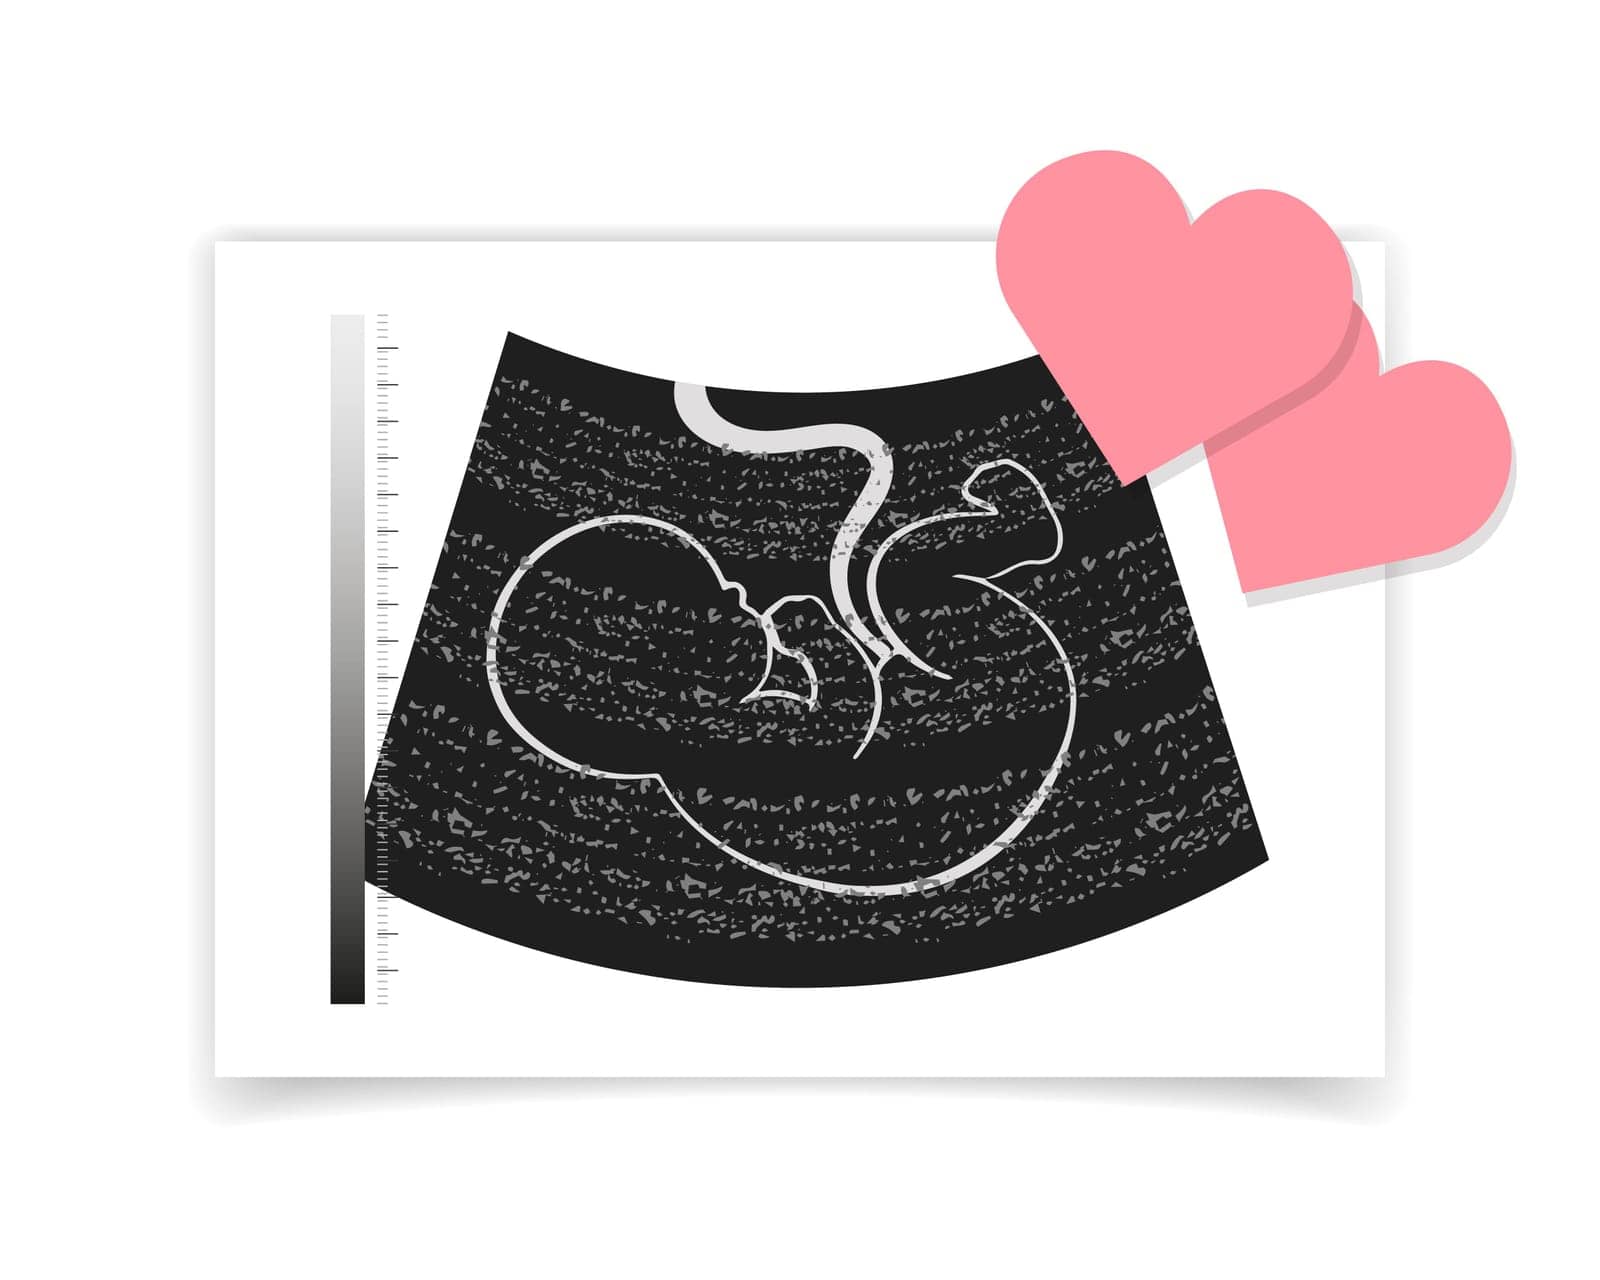 Photograph of an ultrasound of an unborn baby embryo and red hearts. Illustration, postcard, vector